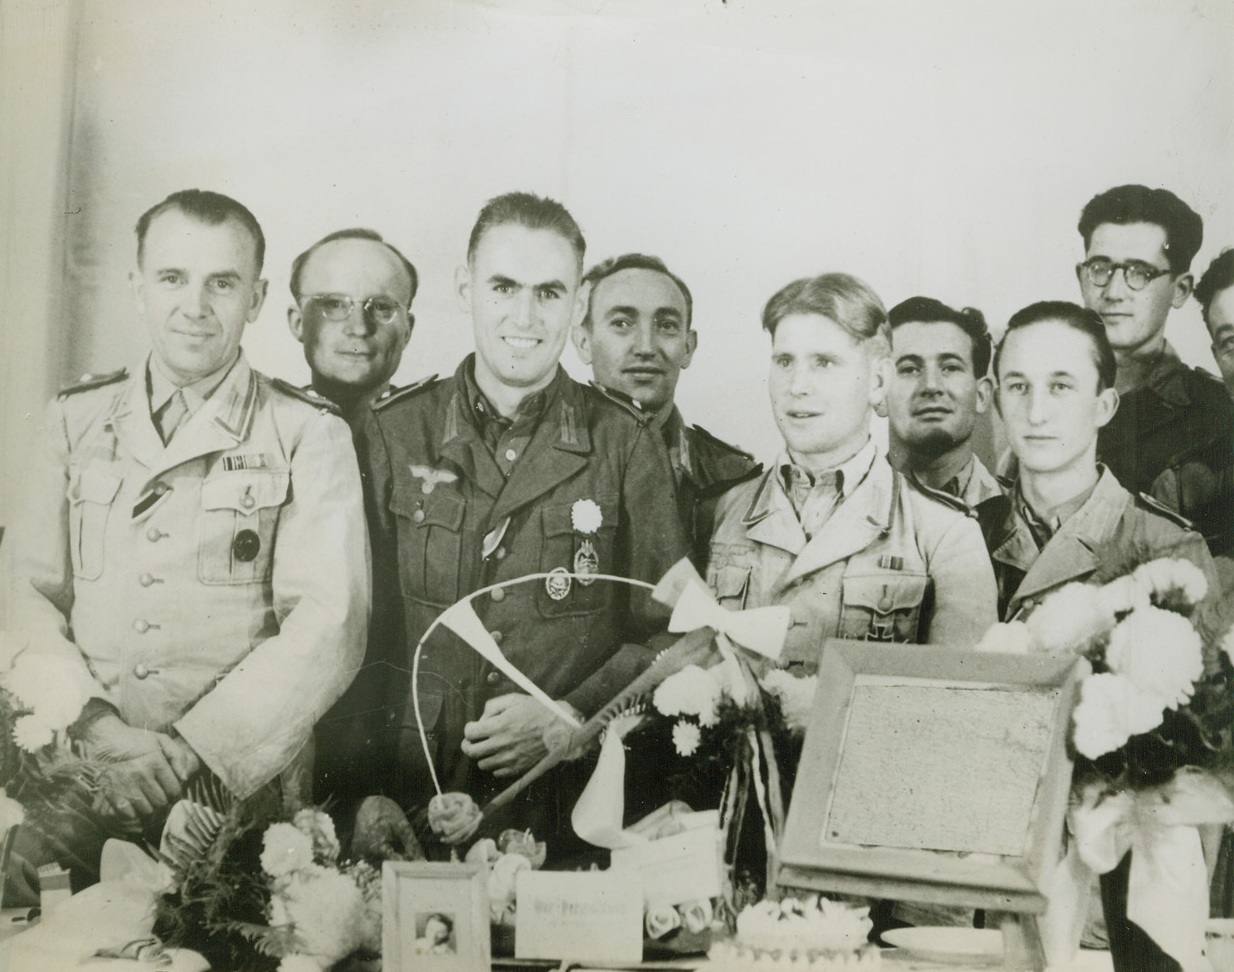 Nazi War Prisoner Married By Proxy. McAlester, Okla. - Married by proxy to his sweetheart in Germany, A prisoner of war (second from left front) in camp at McAlester, Okla., is surrounded by comrades who witnessed the ceremony. At left of bride’s picture on table is her bouquet and at right is small-tiered wedding cake. Oil painting, a wedding present, has been censored. Bridegroom wears a ribbon indicating he has received the Iron Cross, second class; the medals are a wound medal and an athletic medal. Credit: ACME;